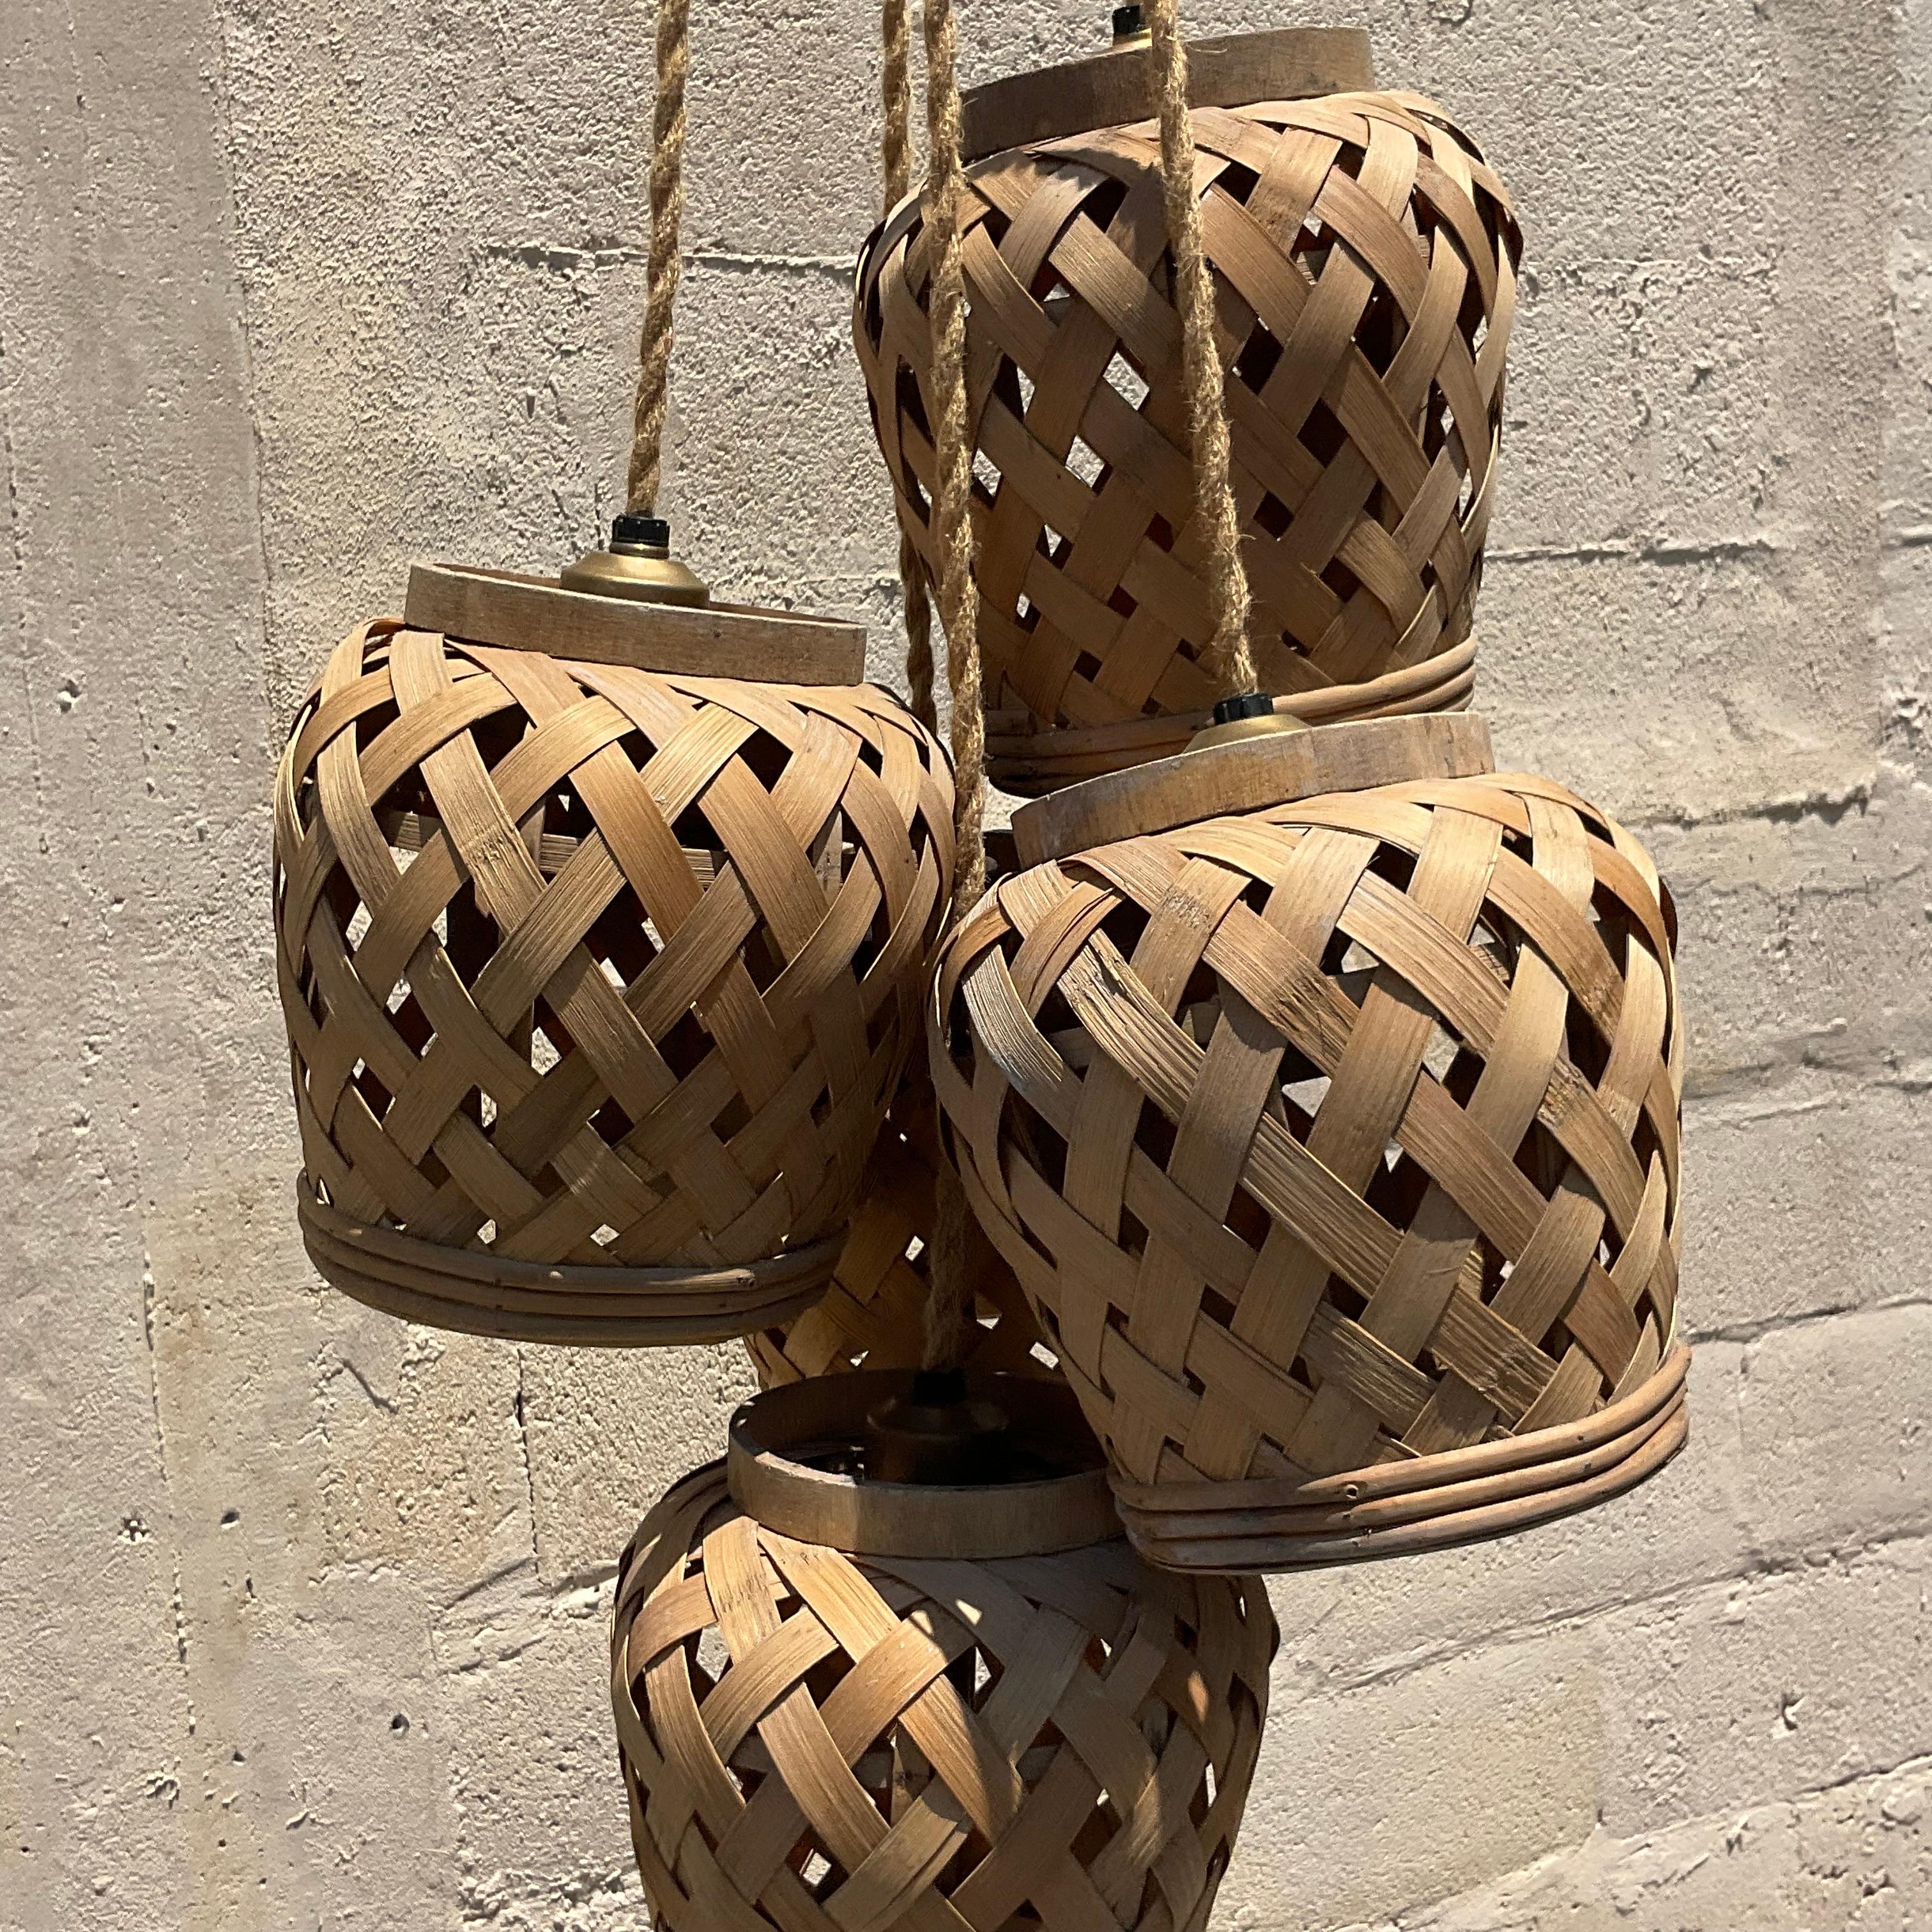 Illuminate your space with our Vintage Coastal Basket Cluster Chandelier. Inspired by seaside charm, this chandelier features a cluster of woven baskets, adding a rustic coastal touch to any room. A unique statement piece that brings a touch of